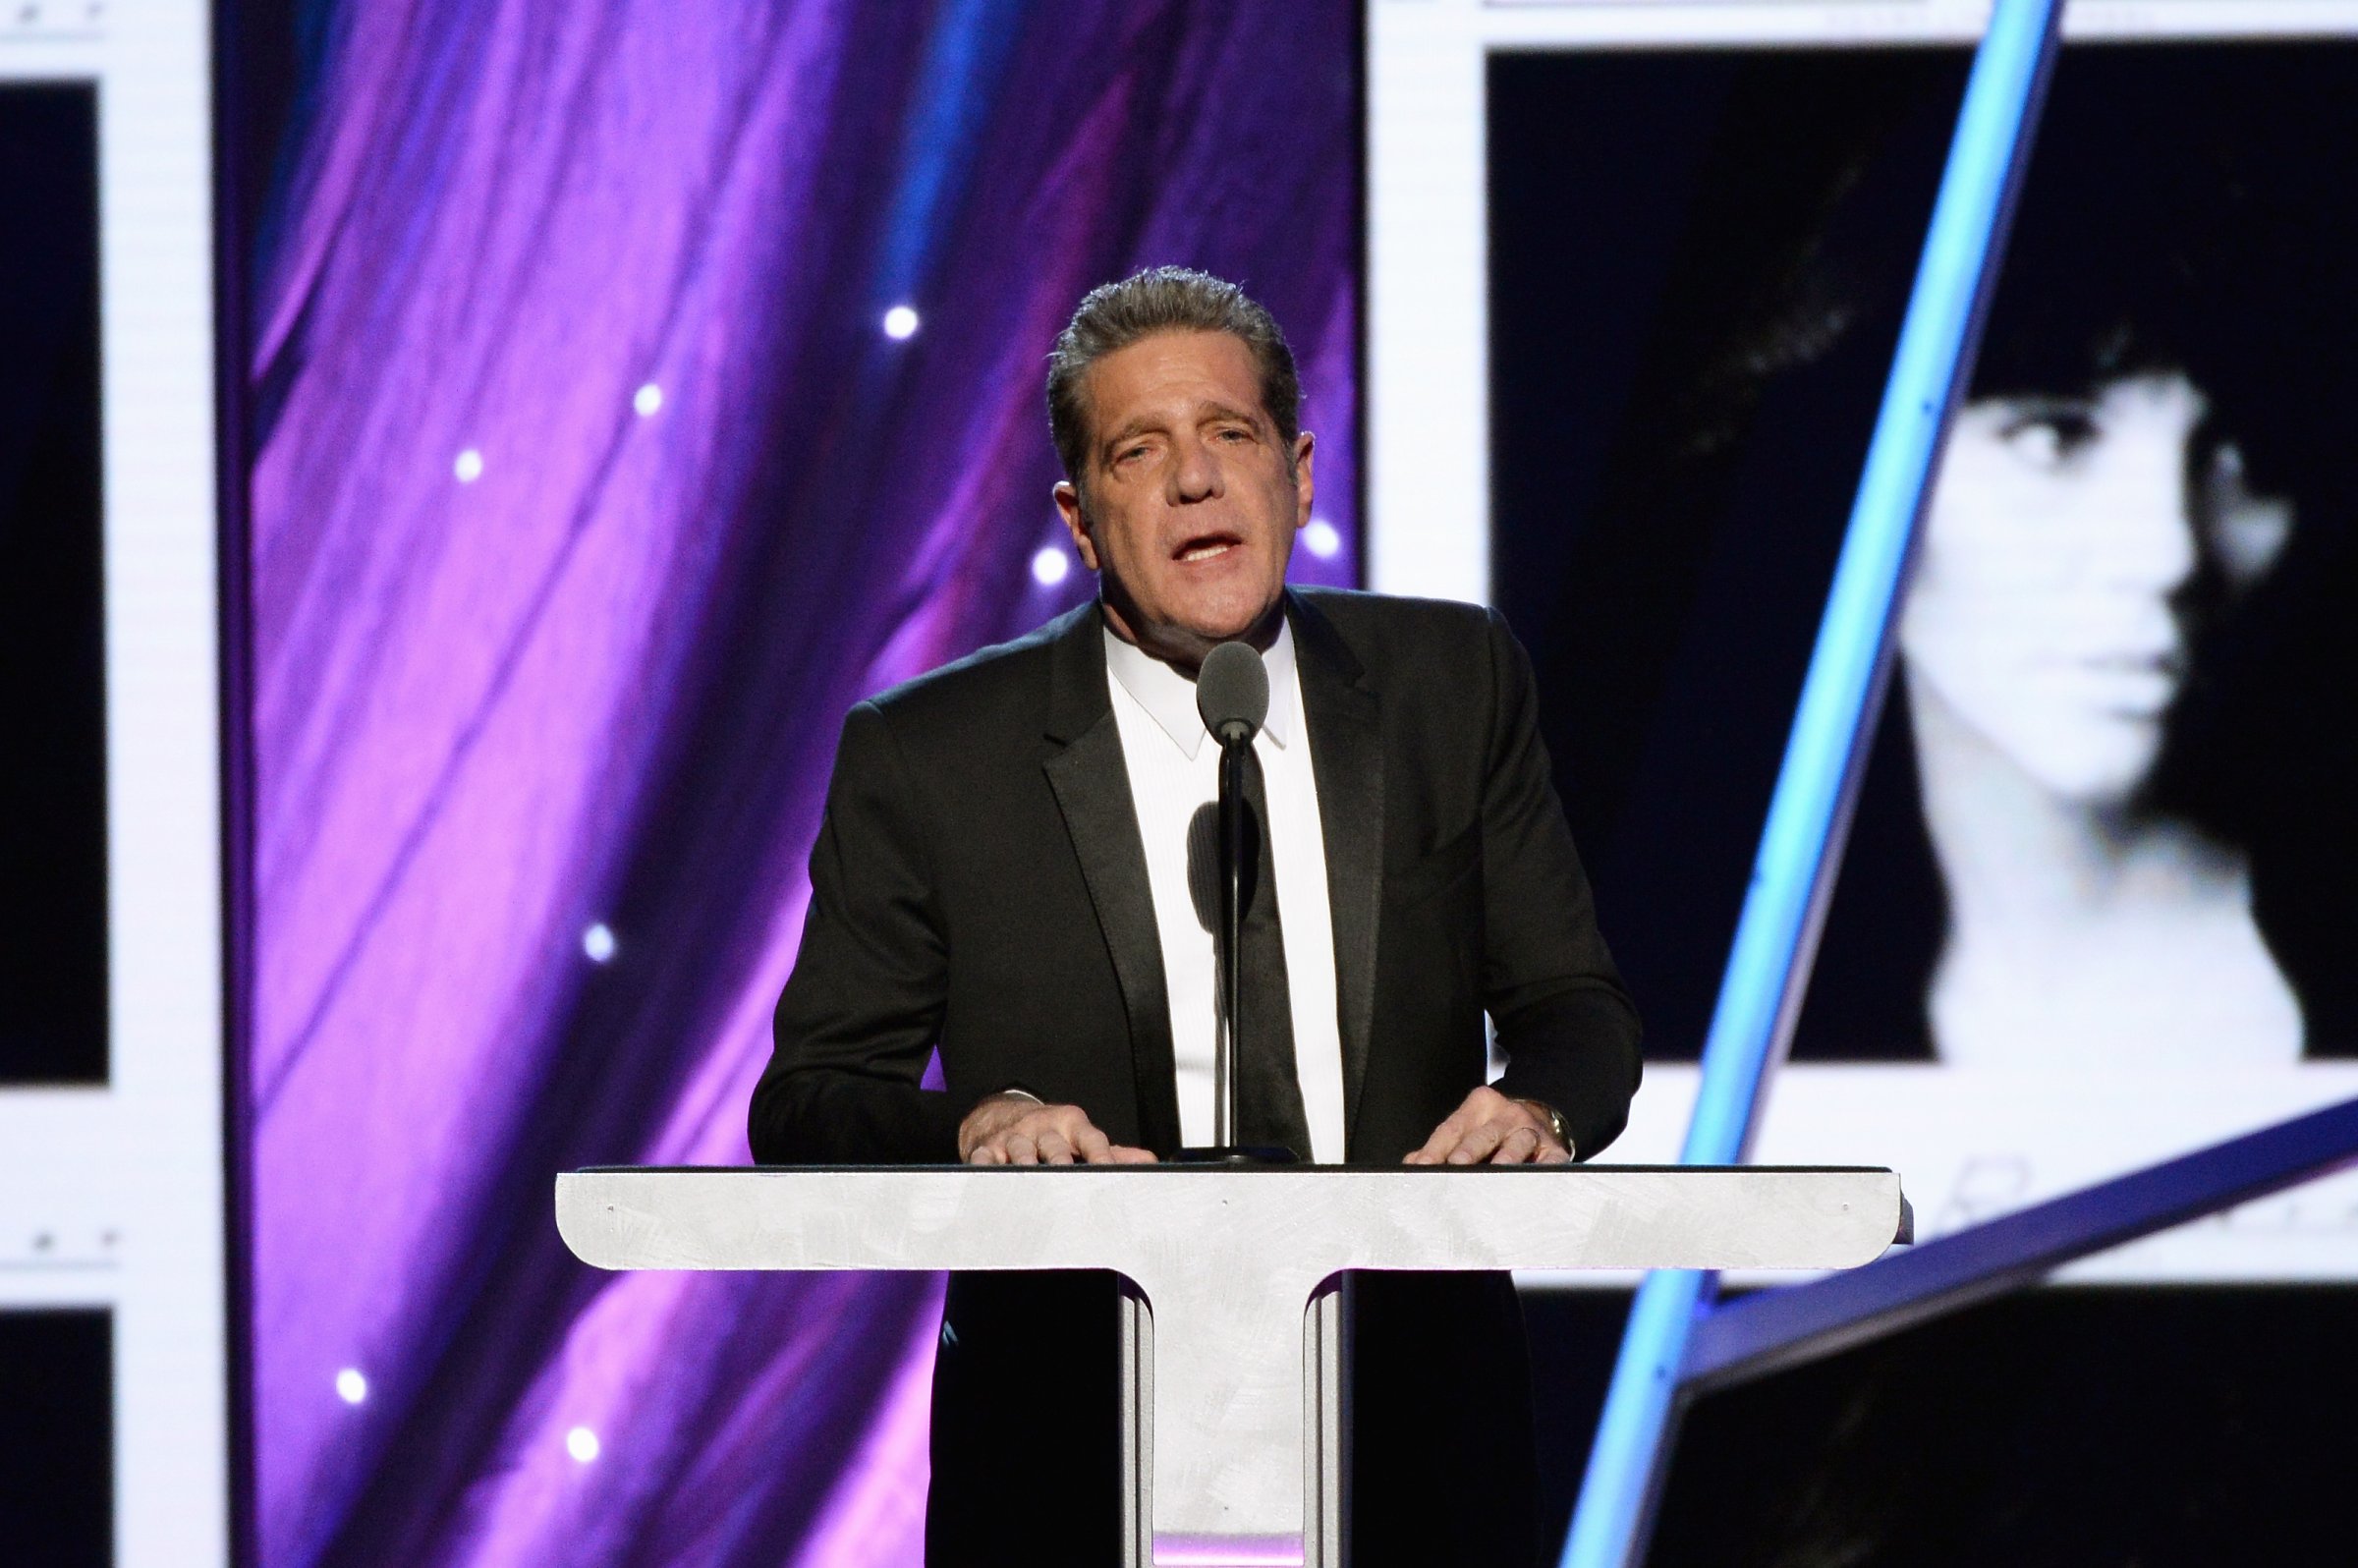 Glenn Frey speaks onstage, inducting Linda Ronstadt into the Rock And Roll Hall Of Fame, at Barclays Center in Brooklyn on April 10, 2014.